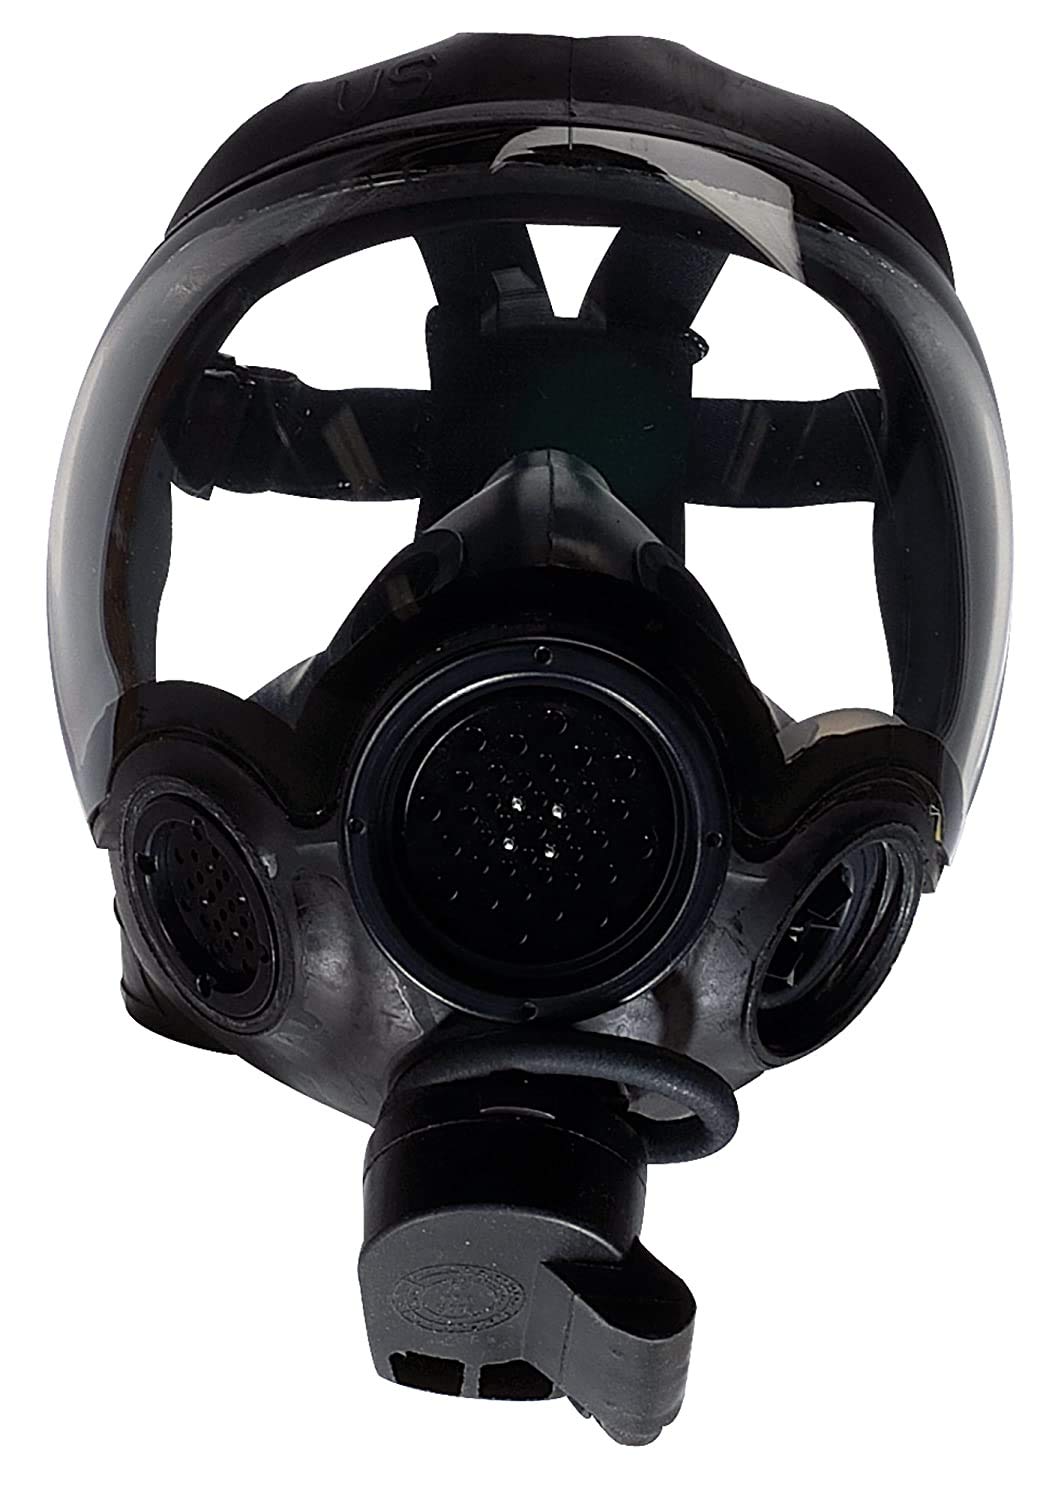 MSA 10051287 Millennium Riot Control Gas Mask - Size: Medium, Color: Clear, Reusable Respirator With Replaceable Components, Durable Respiratory Protection, For Use With Riot Control Cannisters